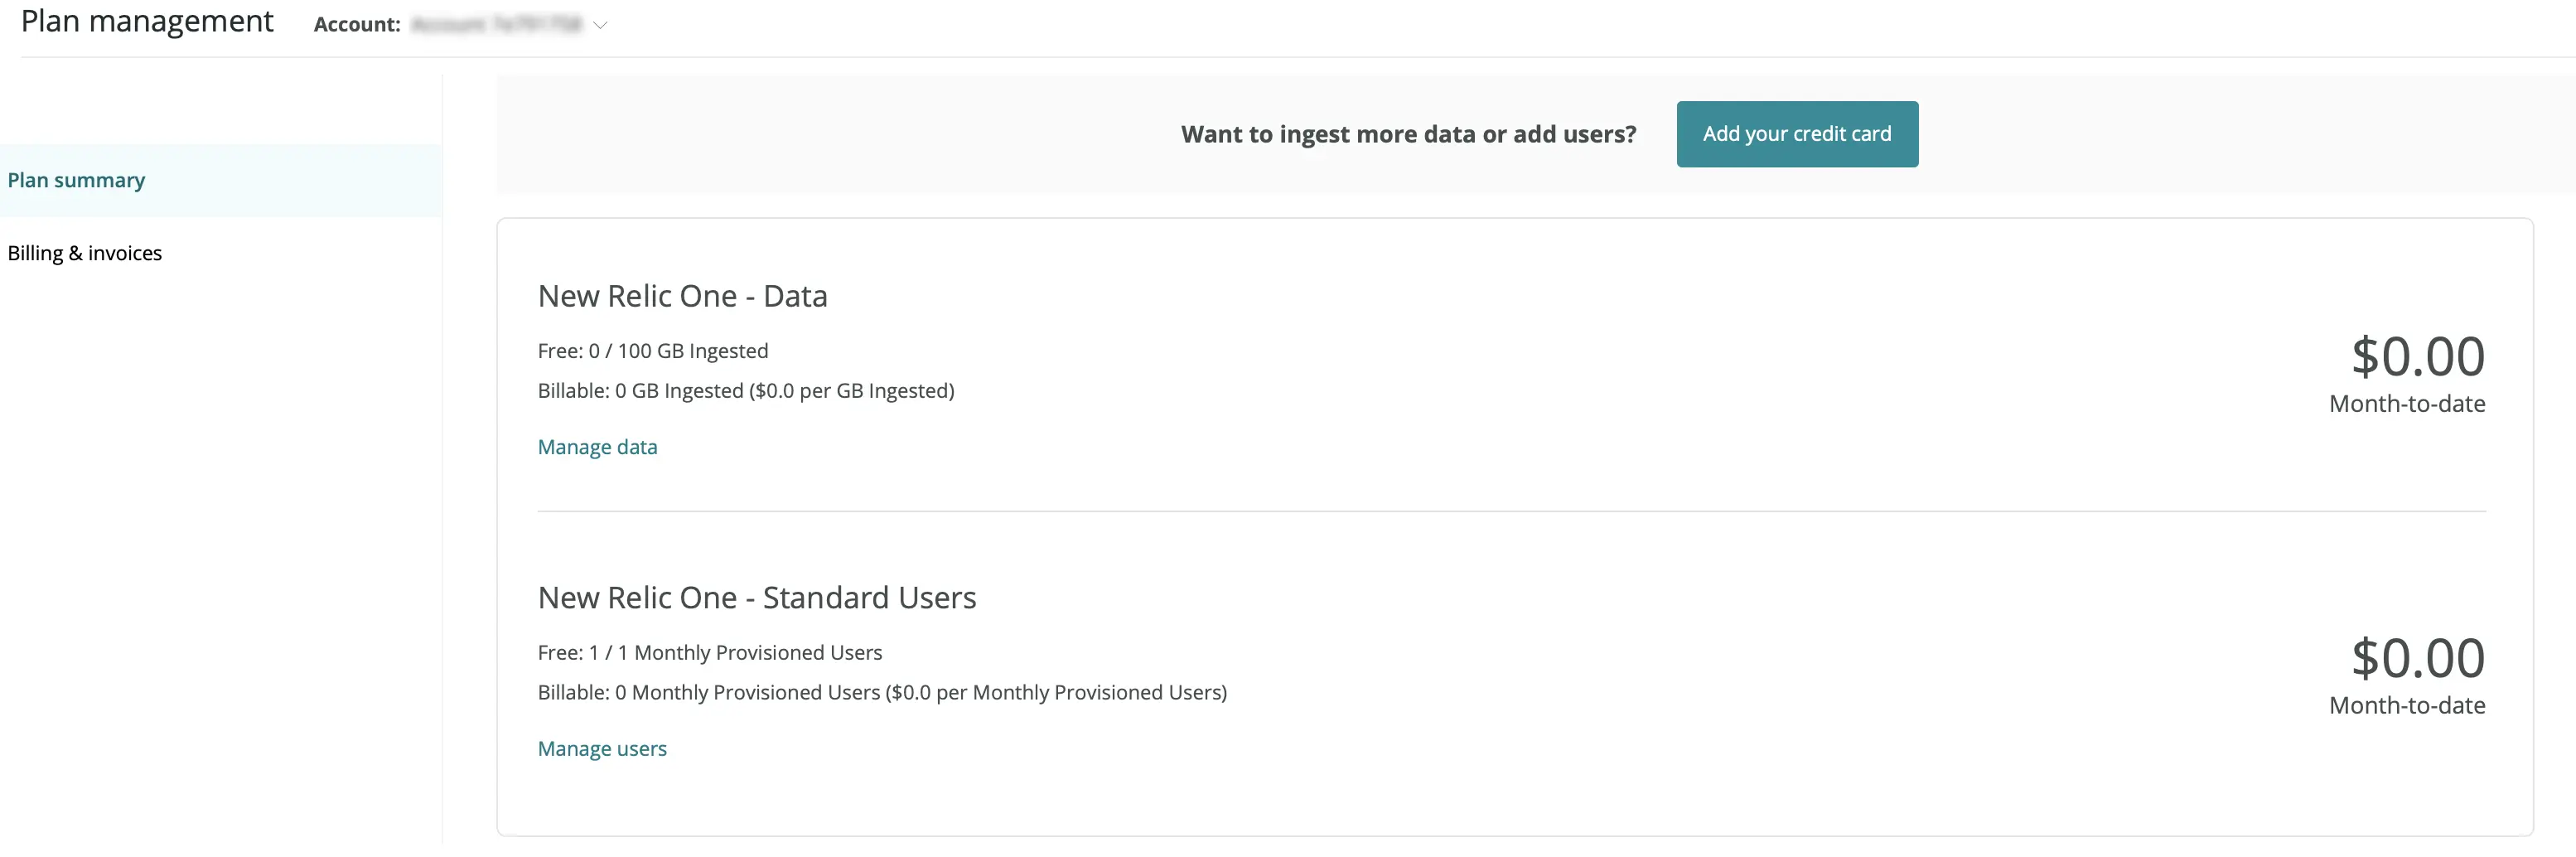 New Relic usage-based pricing - billing UI